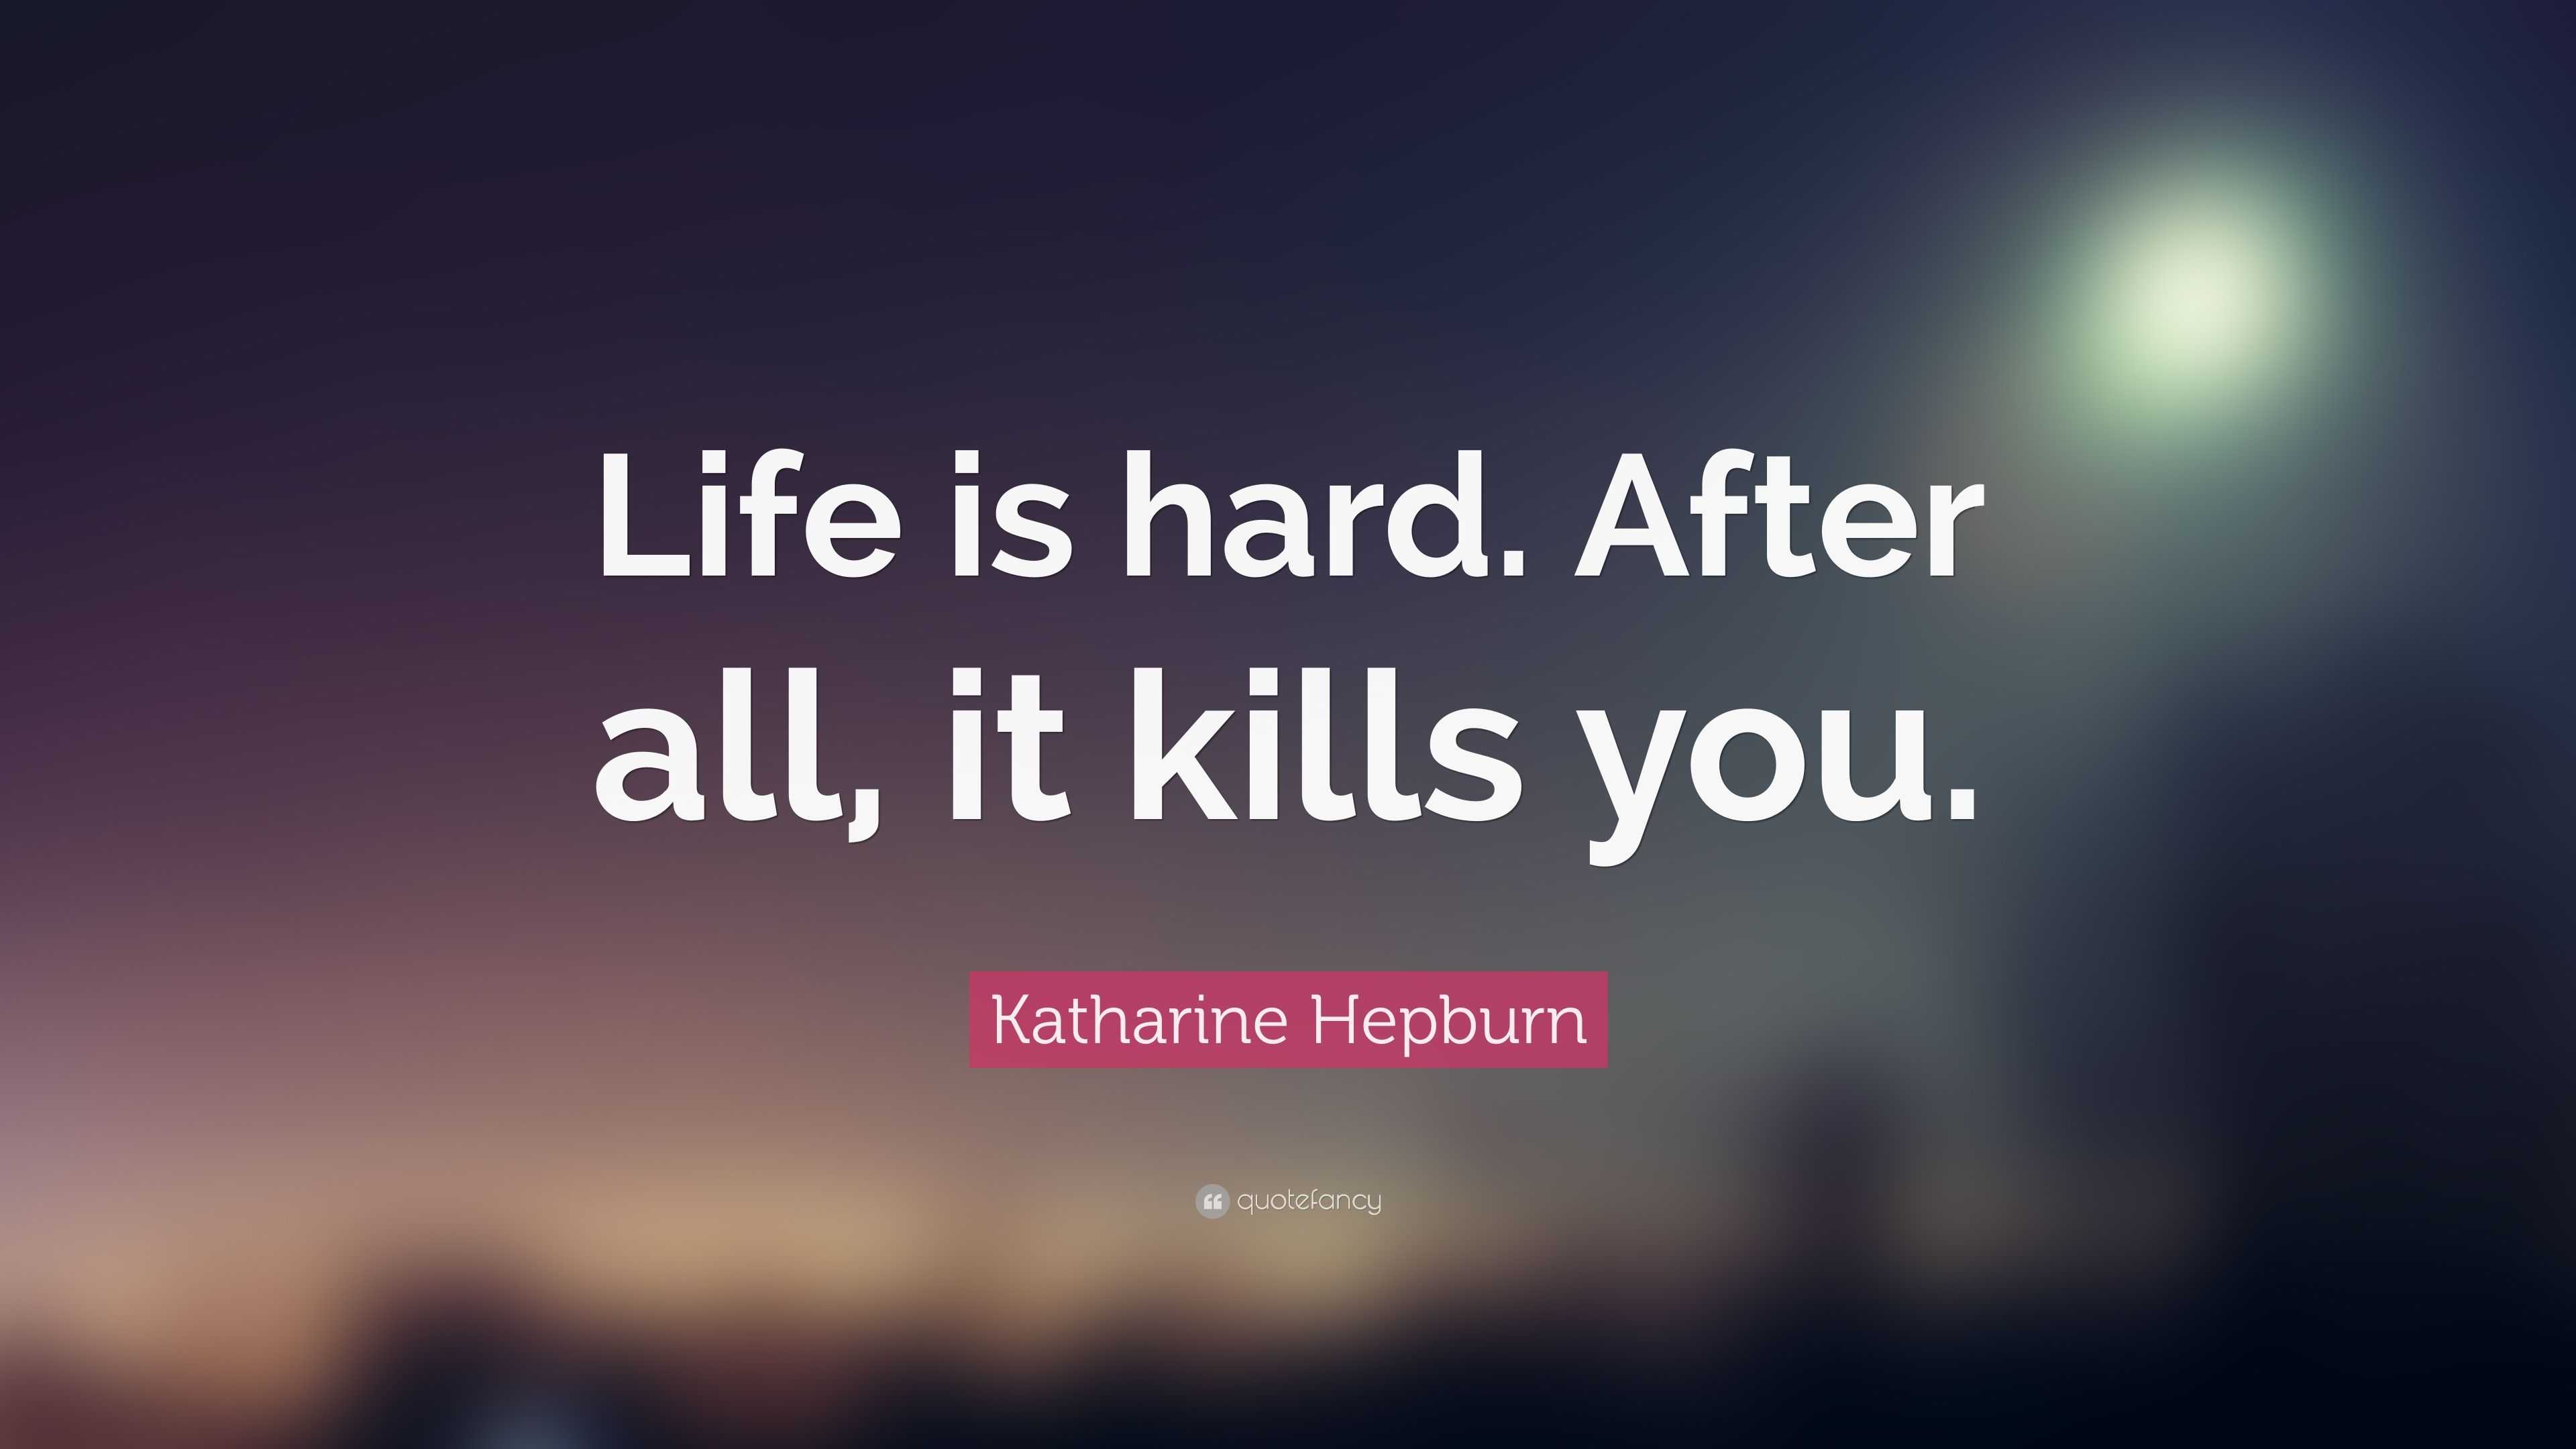 Katharine Hepburn Quote “Life is hard. After all, it